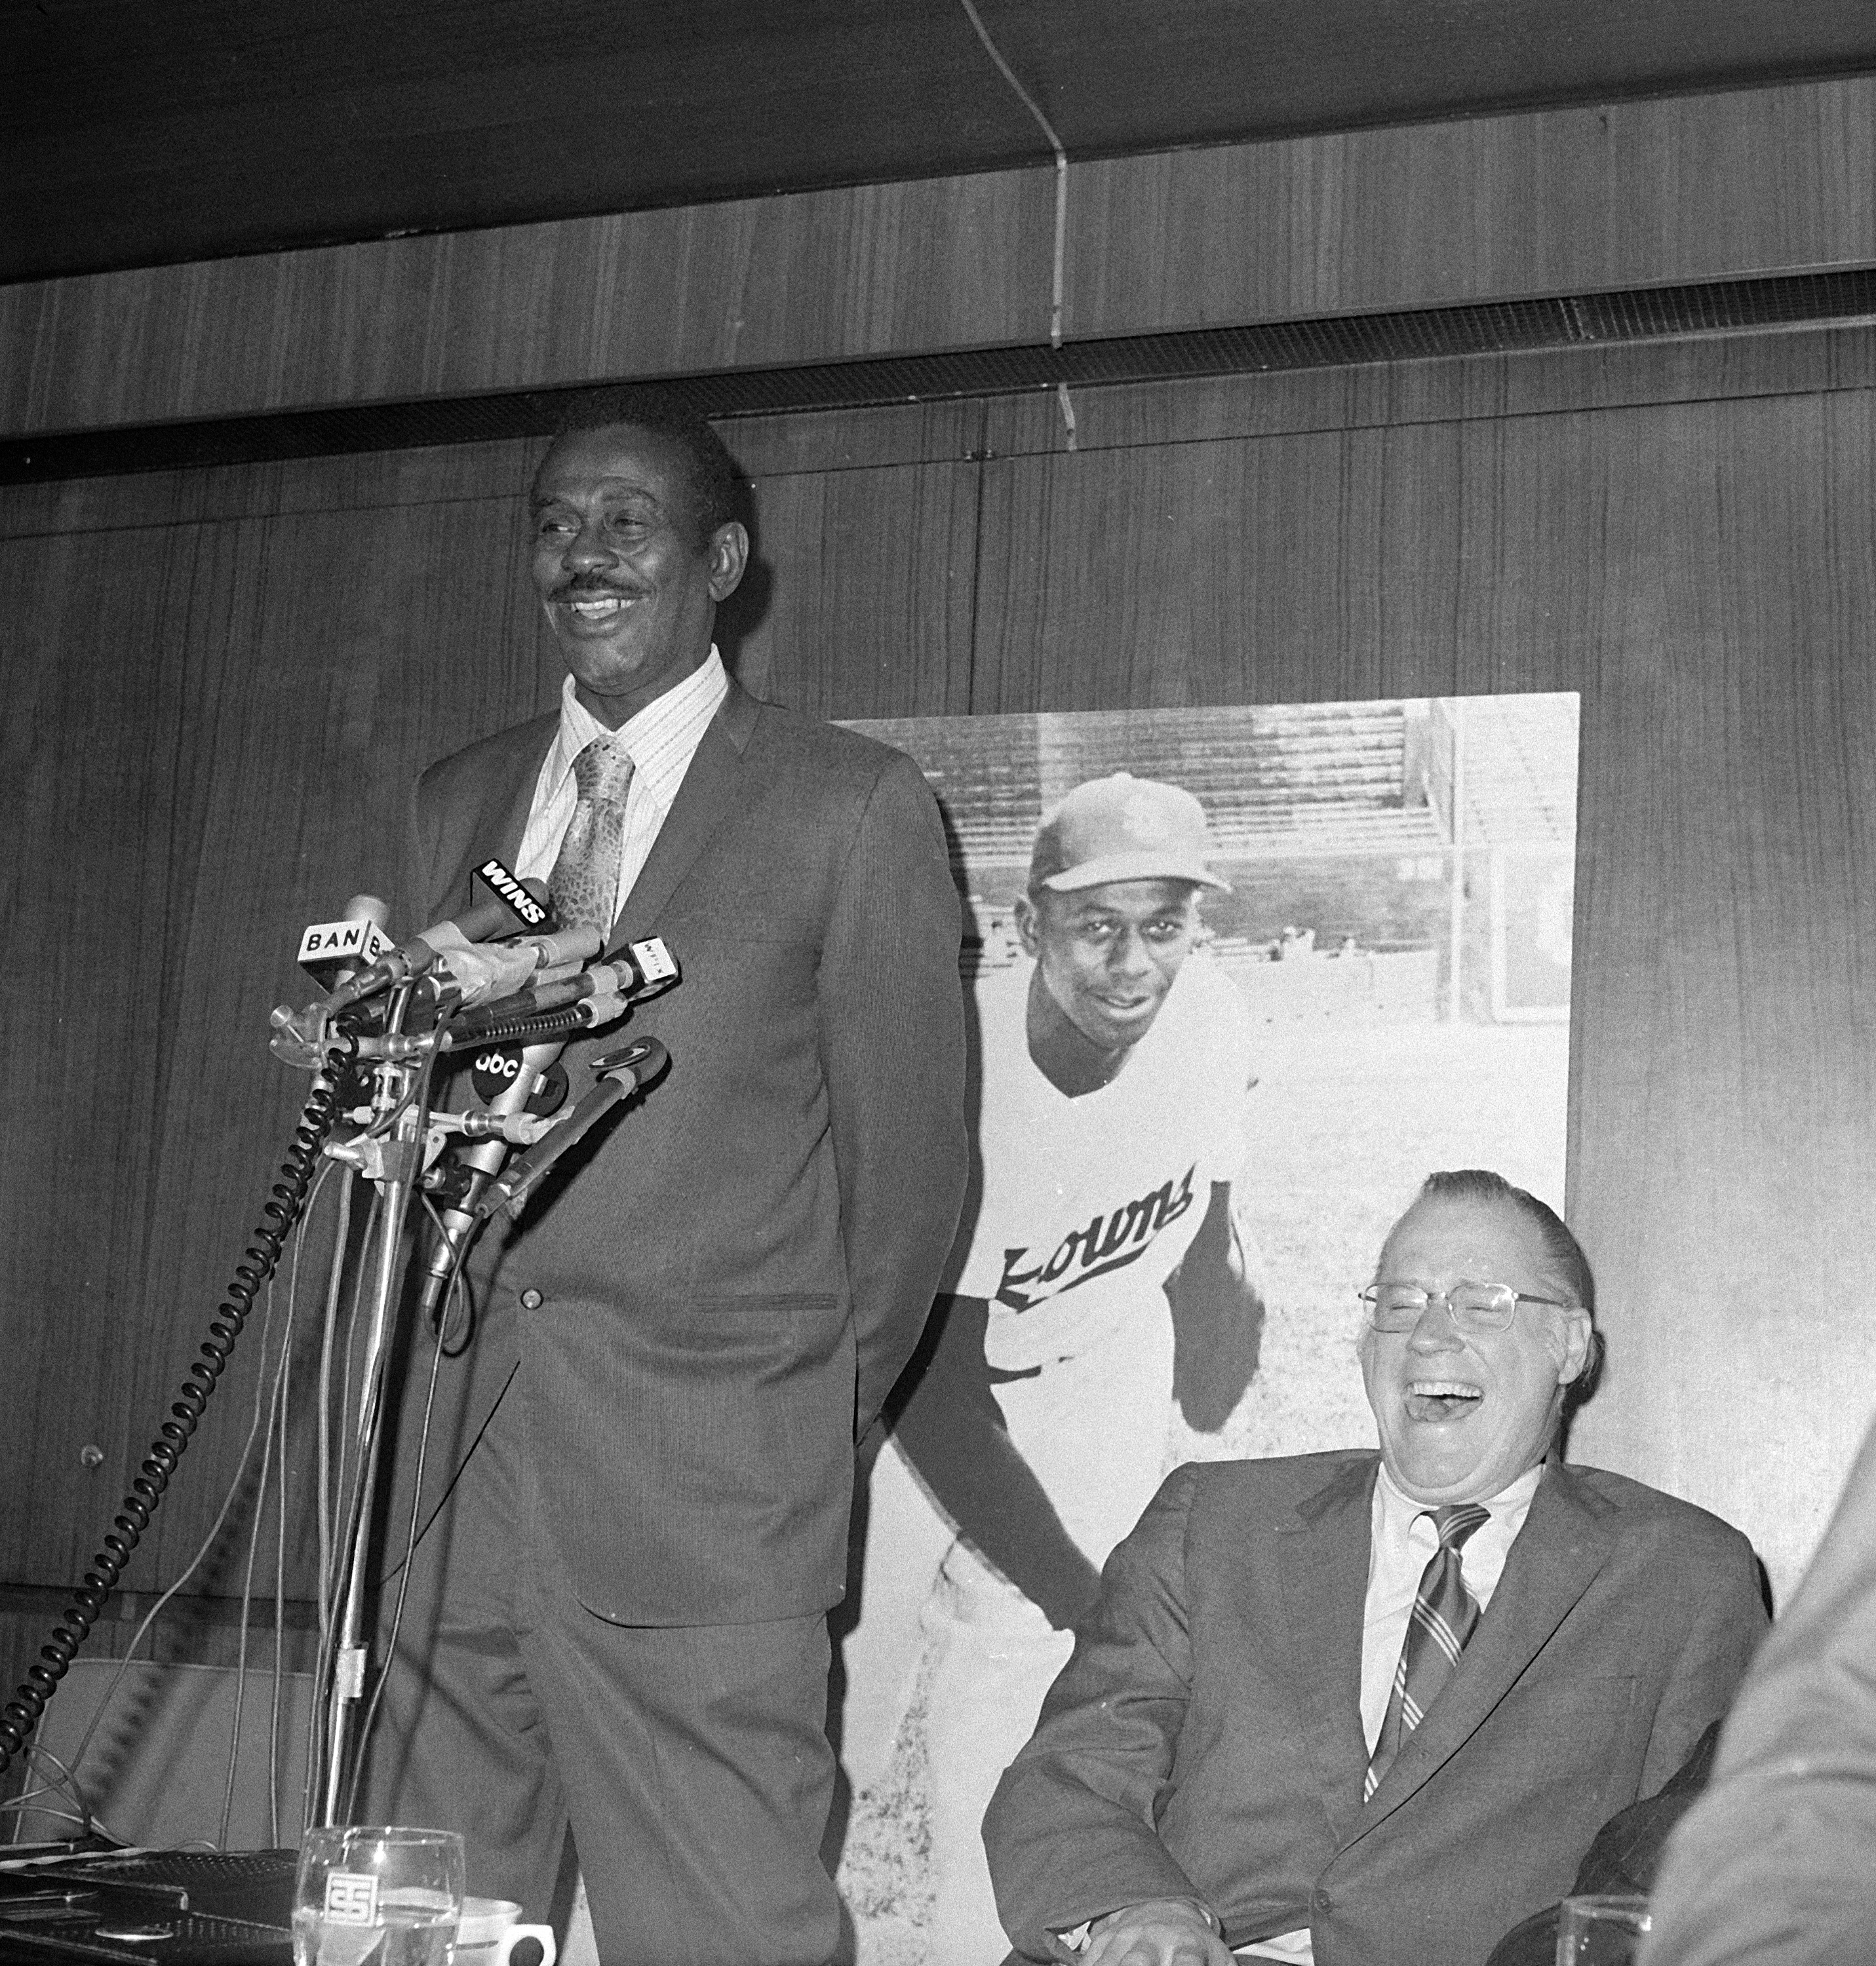 Satchel Paige answers questions from the media in New York on Feb. 9, 1971, after being voted into the Baseball's Hall of Fame in a special category designed to honor the outstanding stars of the Negro Leagues. Seated is baseball commissioner Bowie Kuhn, and, in the background, is a photo of Paige in his playing years with the St. Louis Browns.